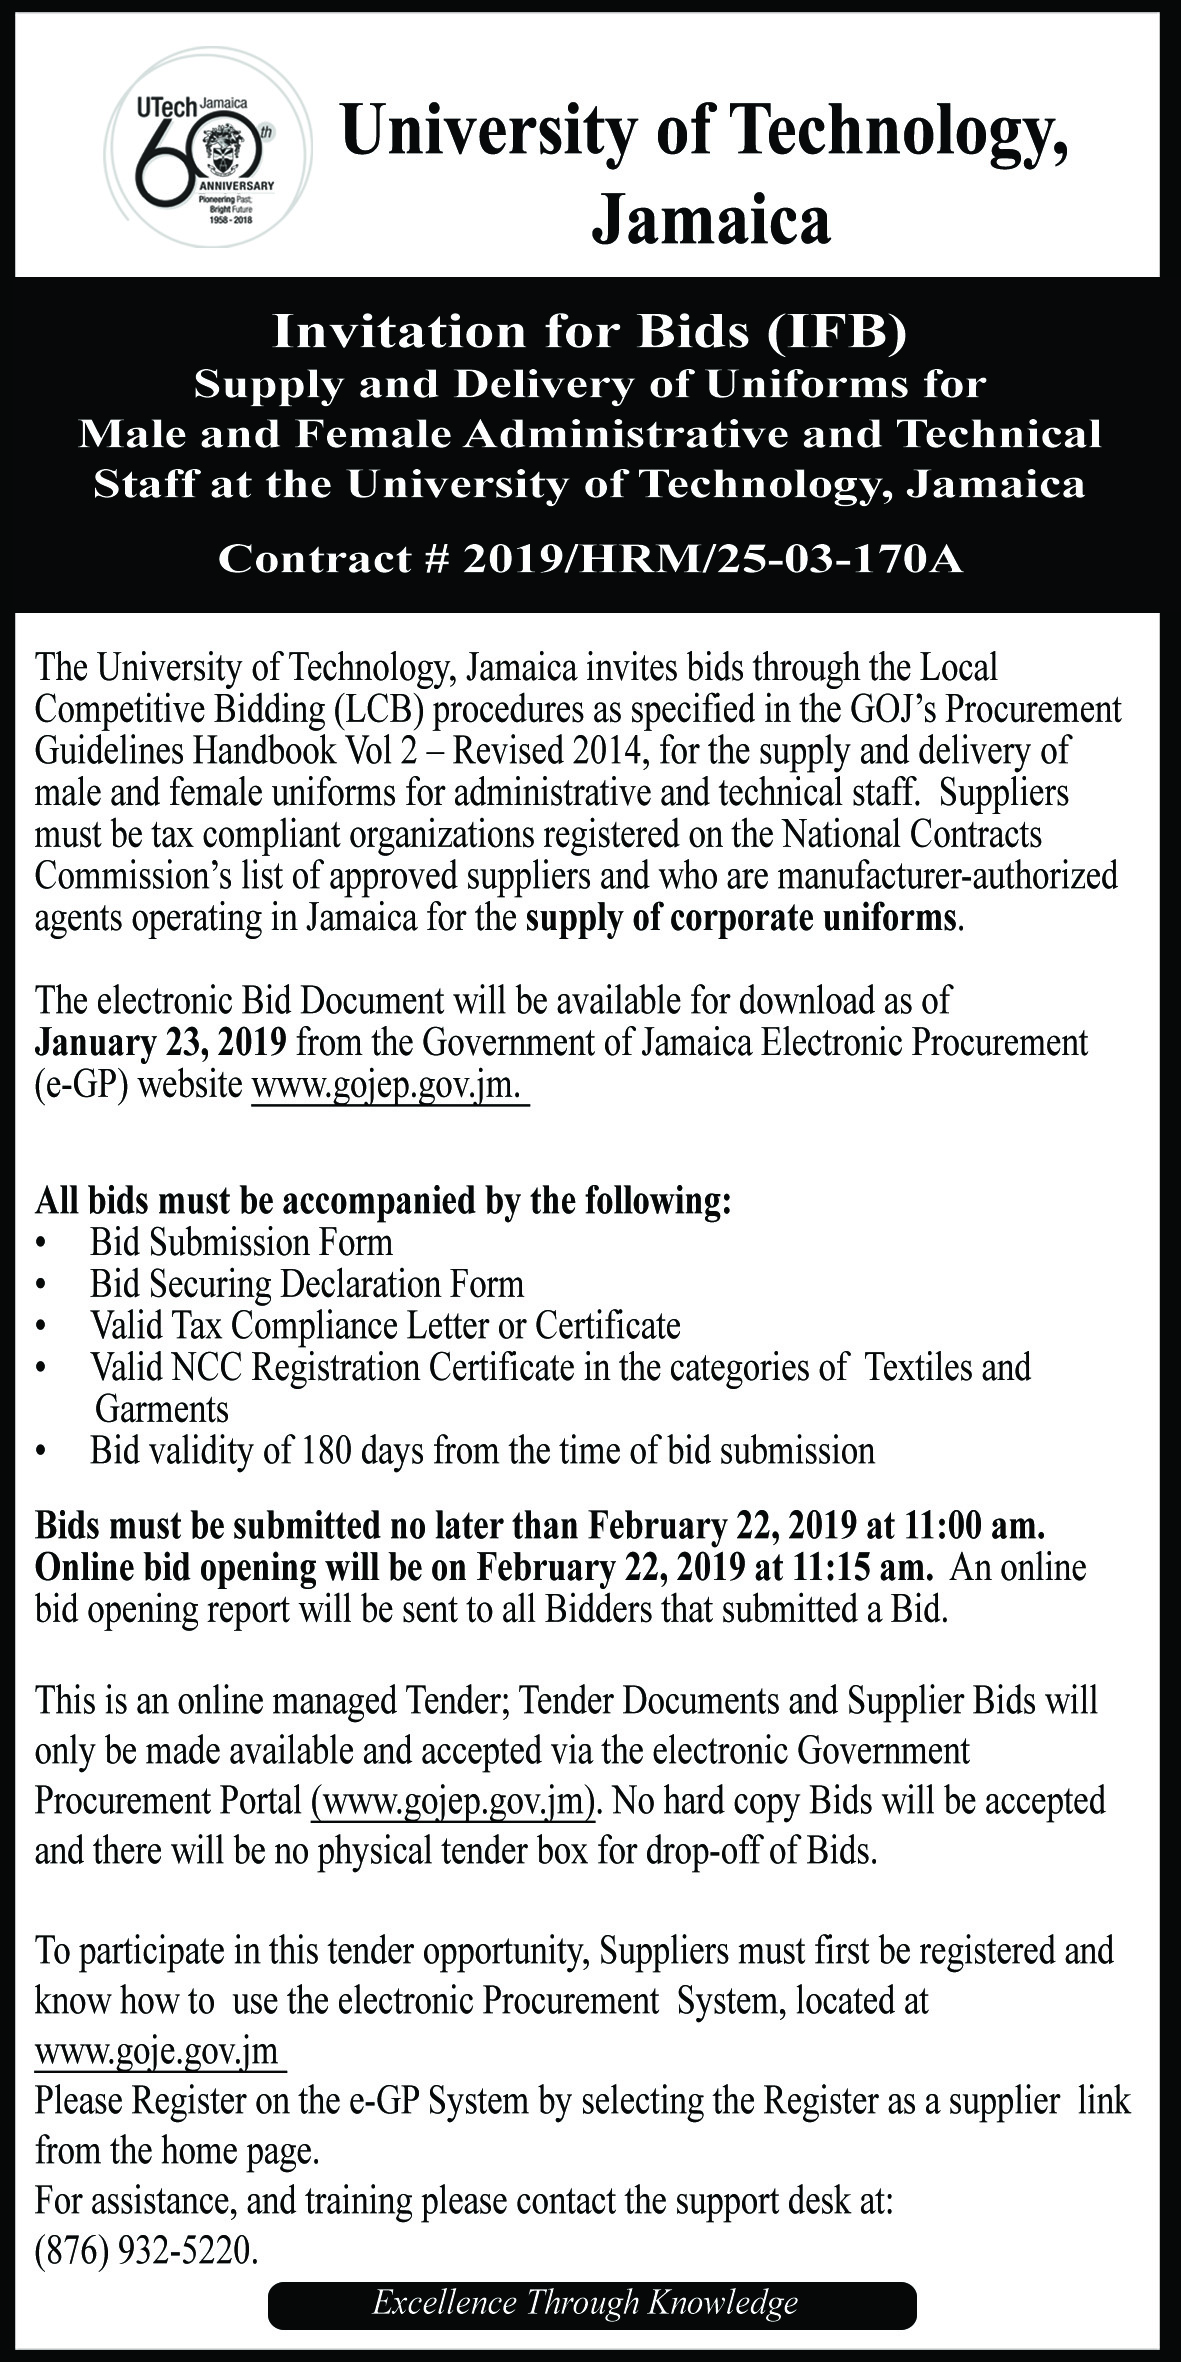 Invitaton For Bids -  Supply and Delivery of Uniforms